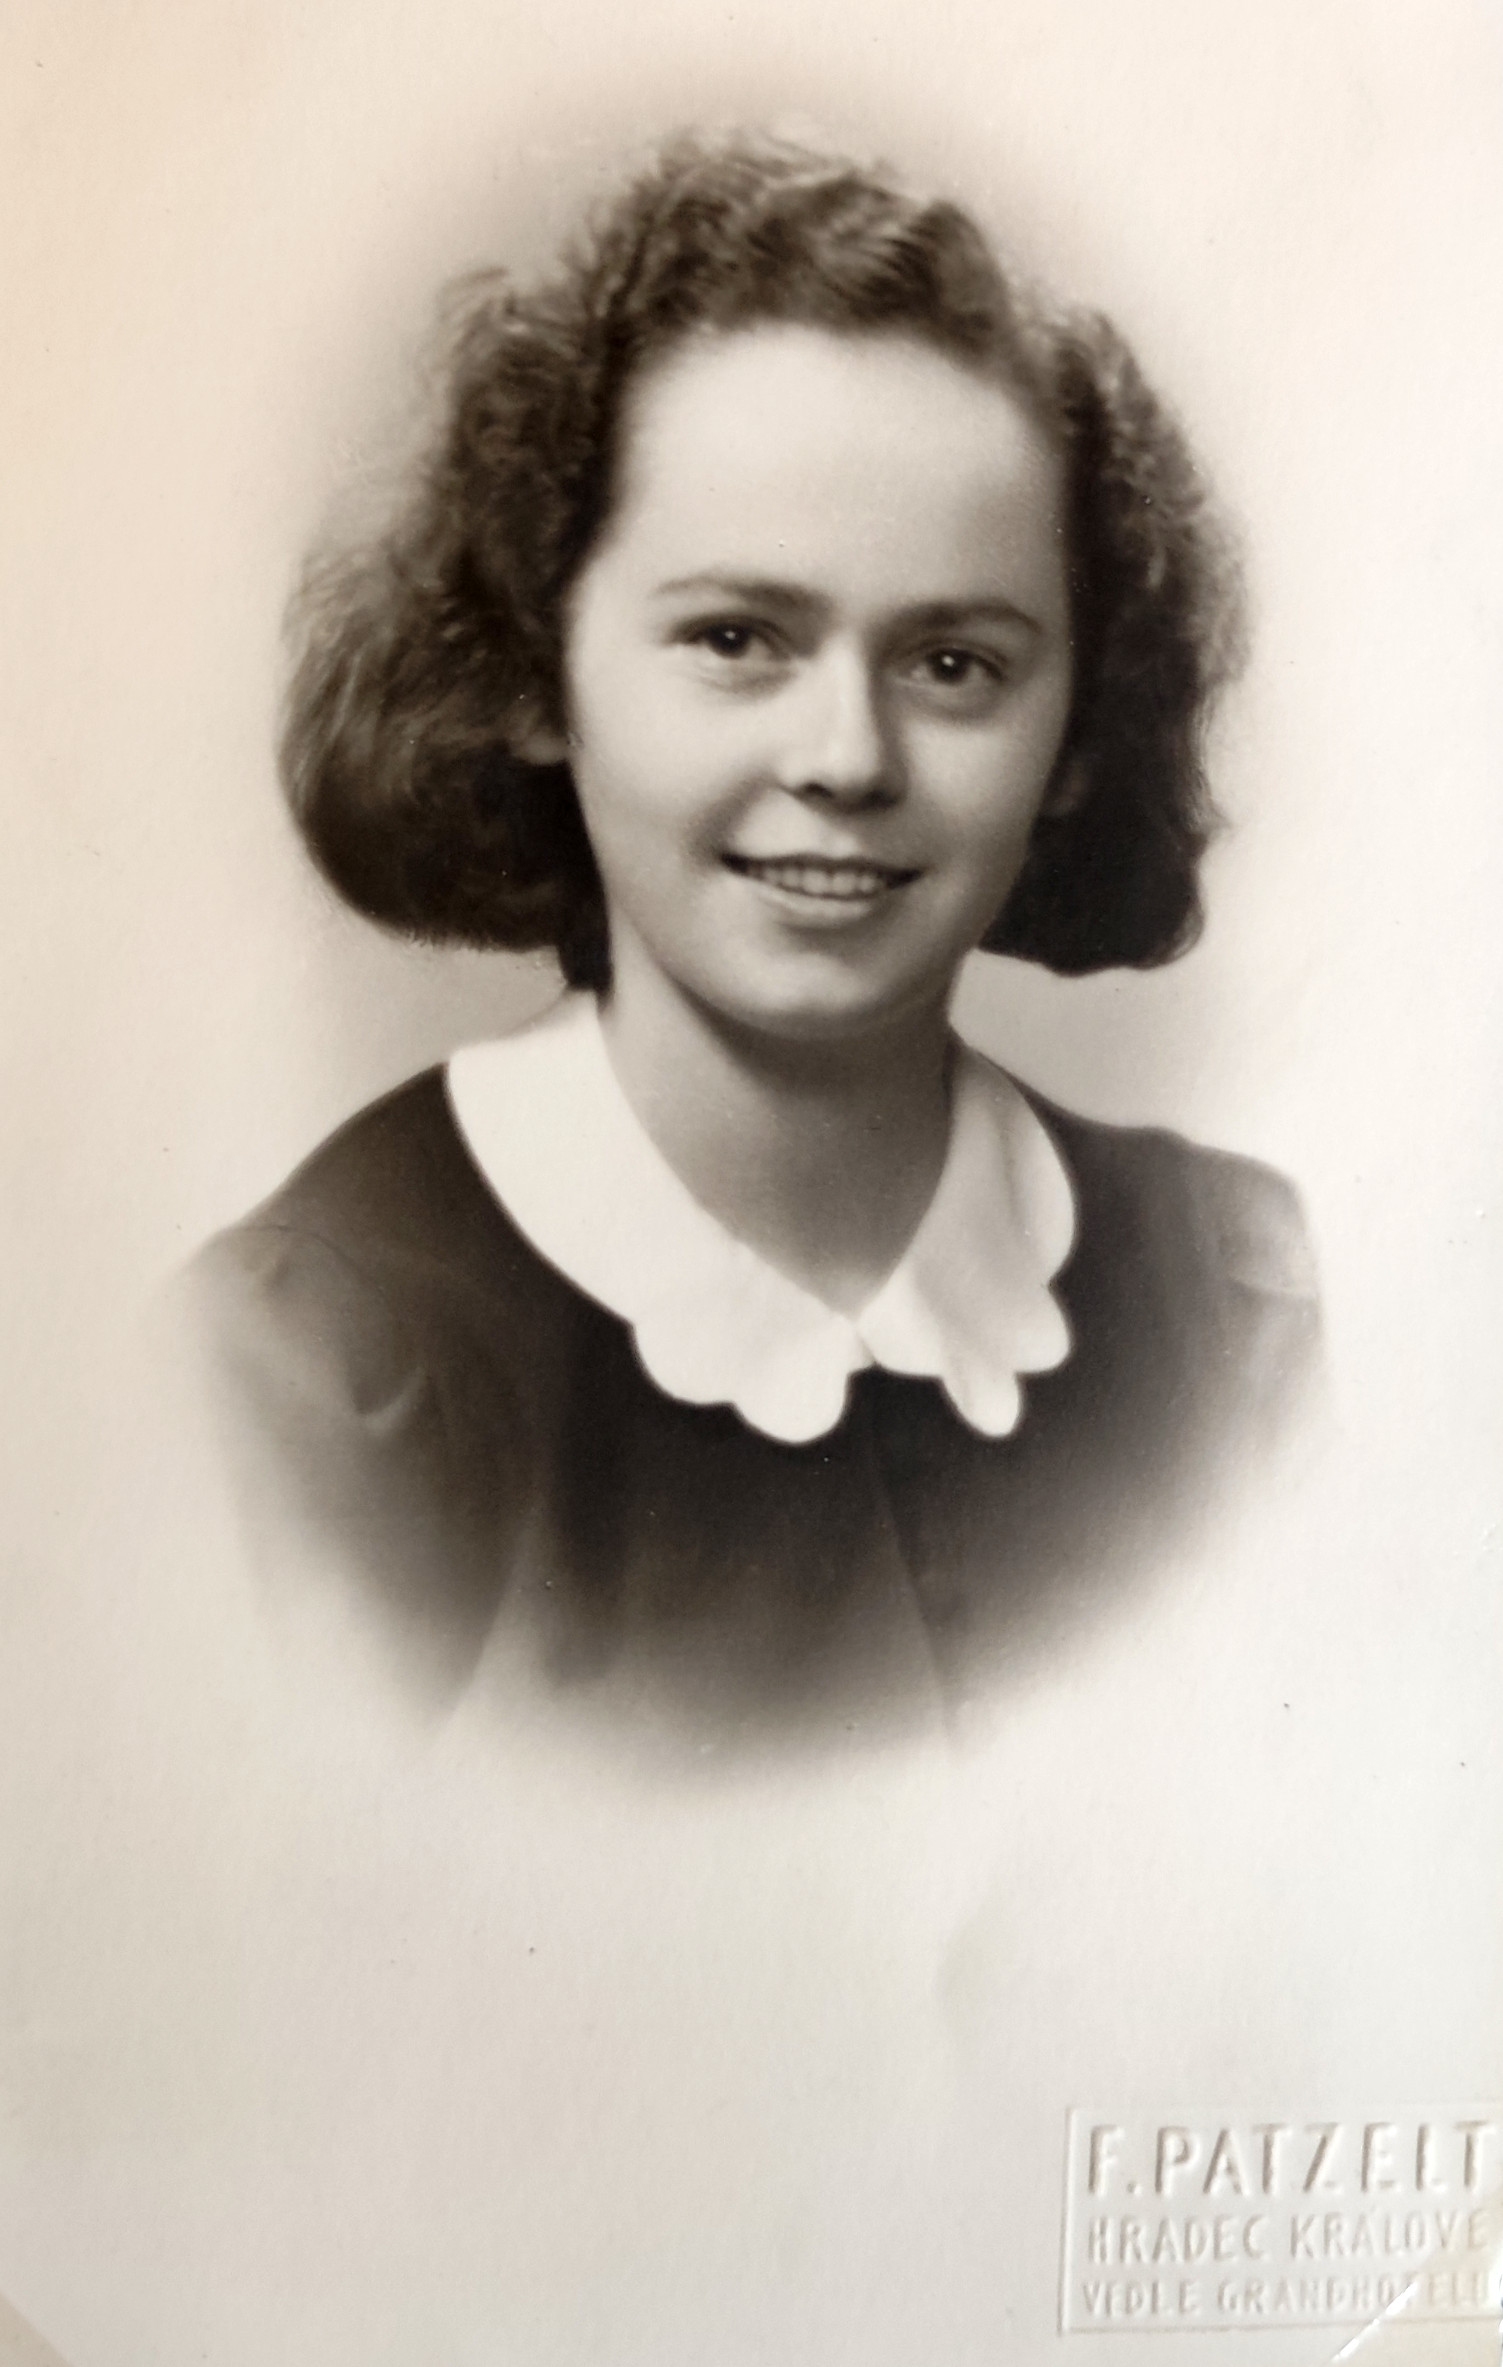 Graduation photo from high school in 1939